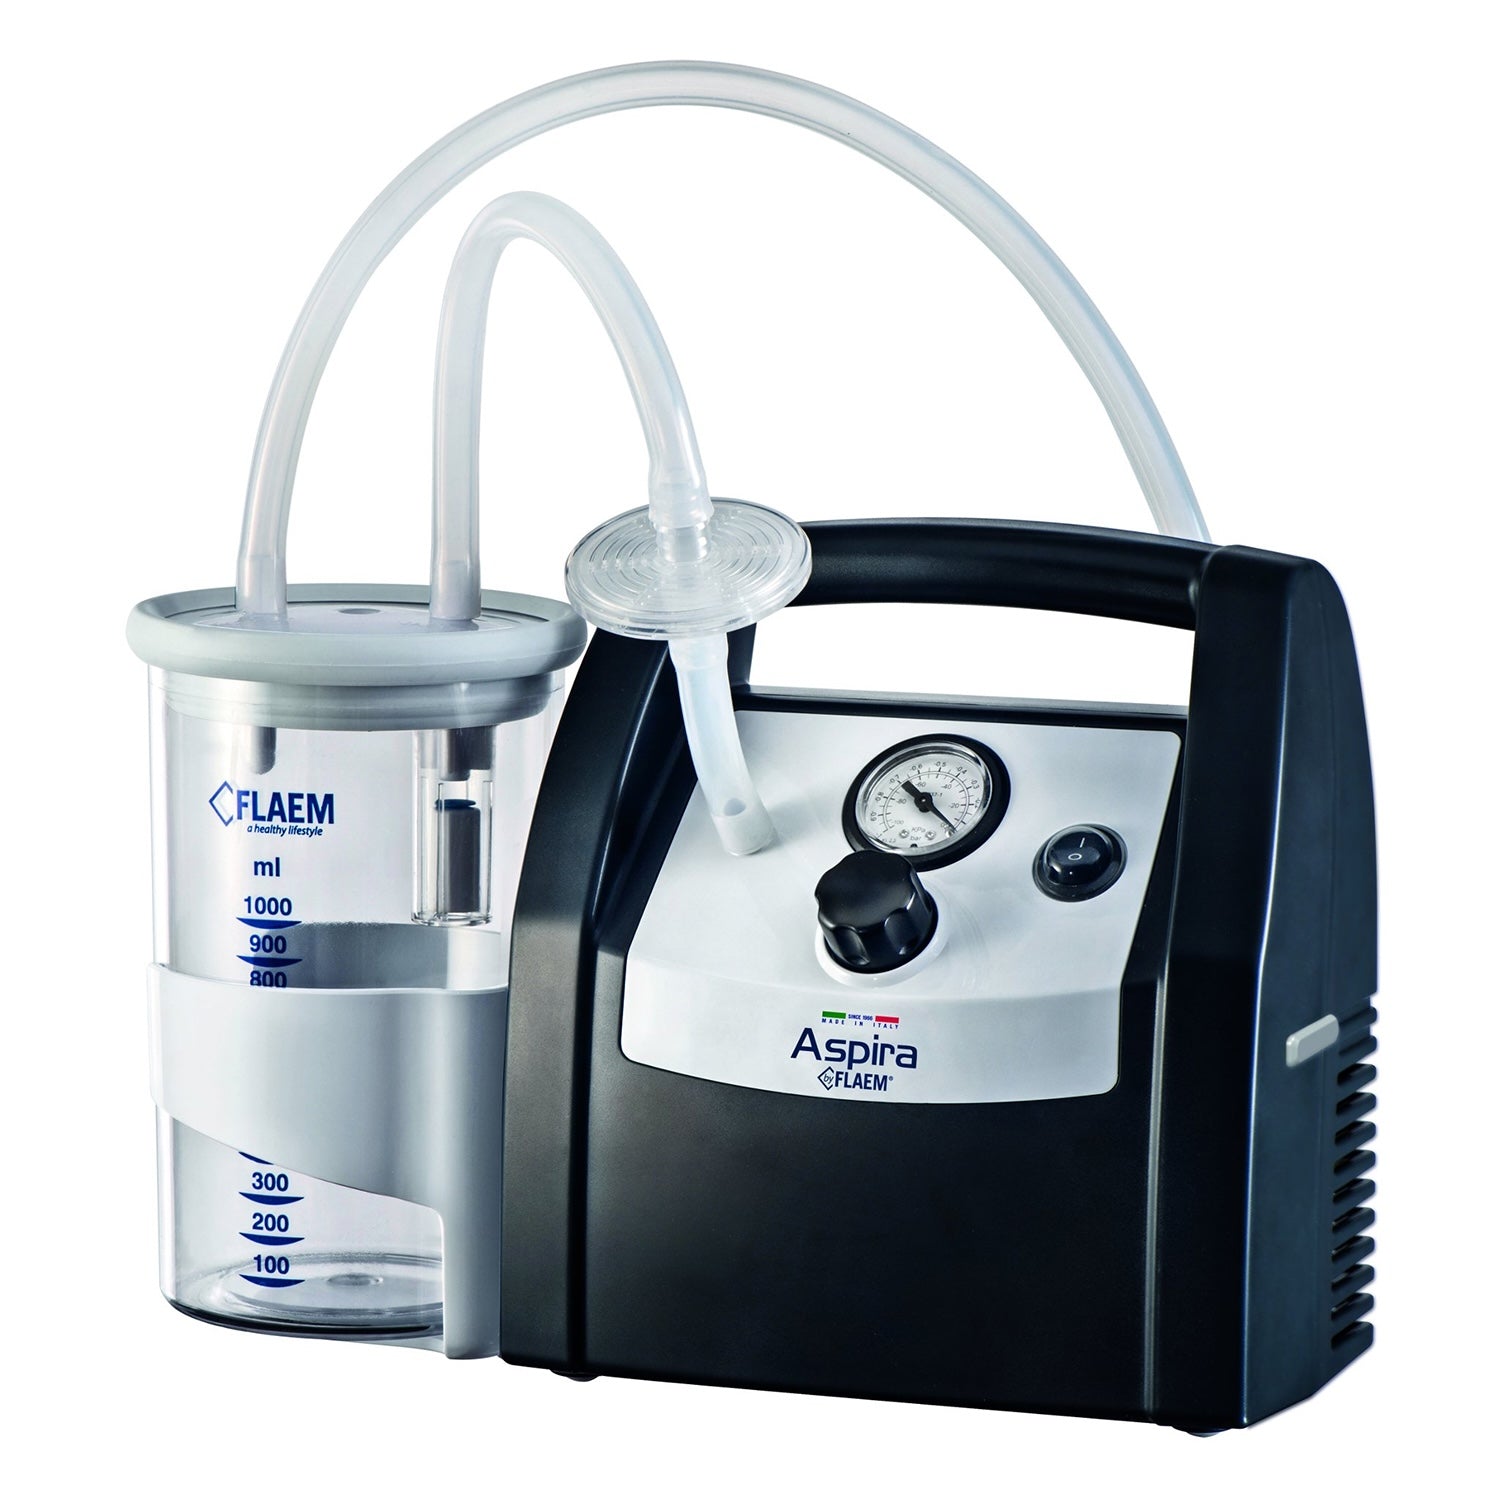 Aspira Plus Aspirator with Double Pump, Bottle & 2 Liners